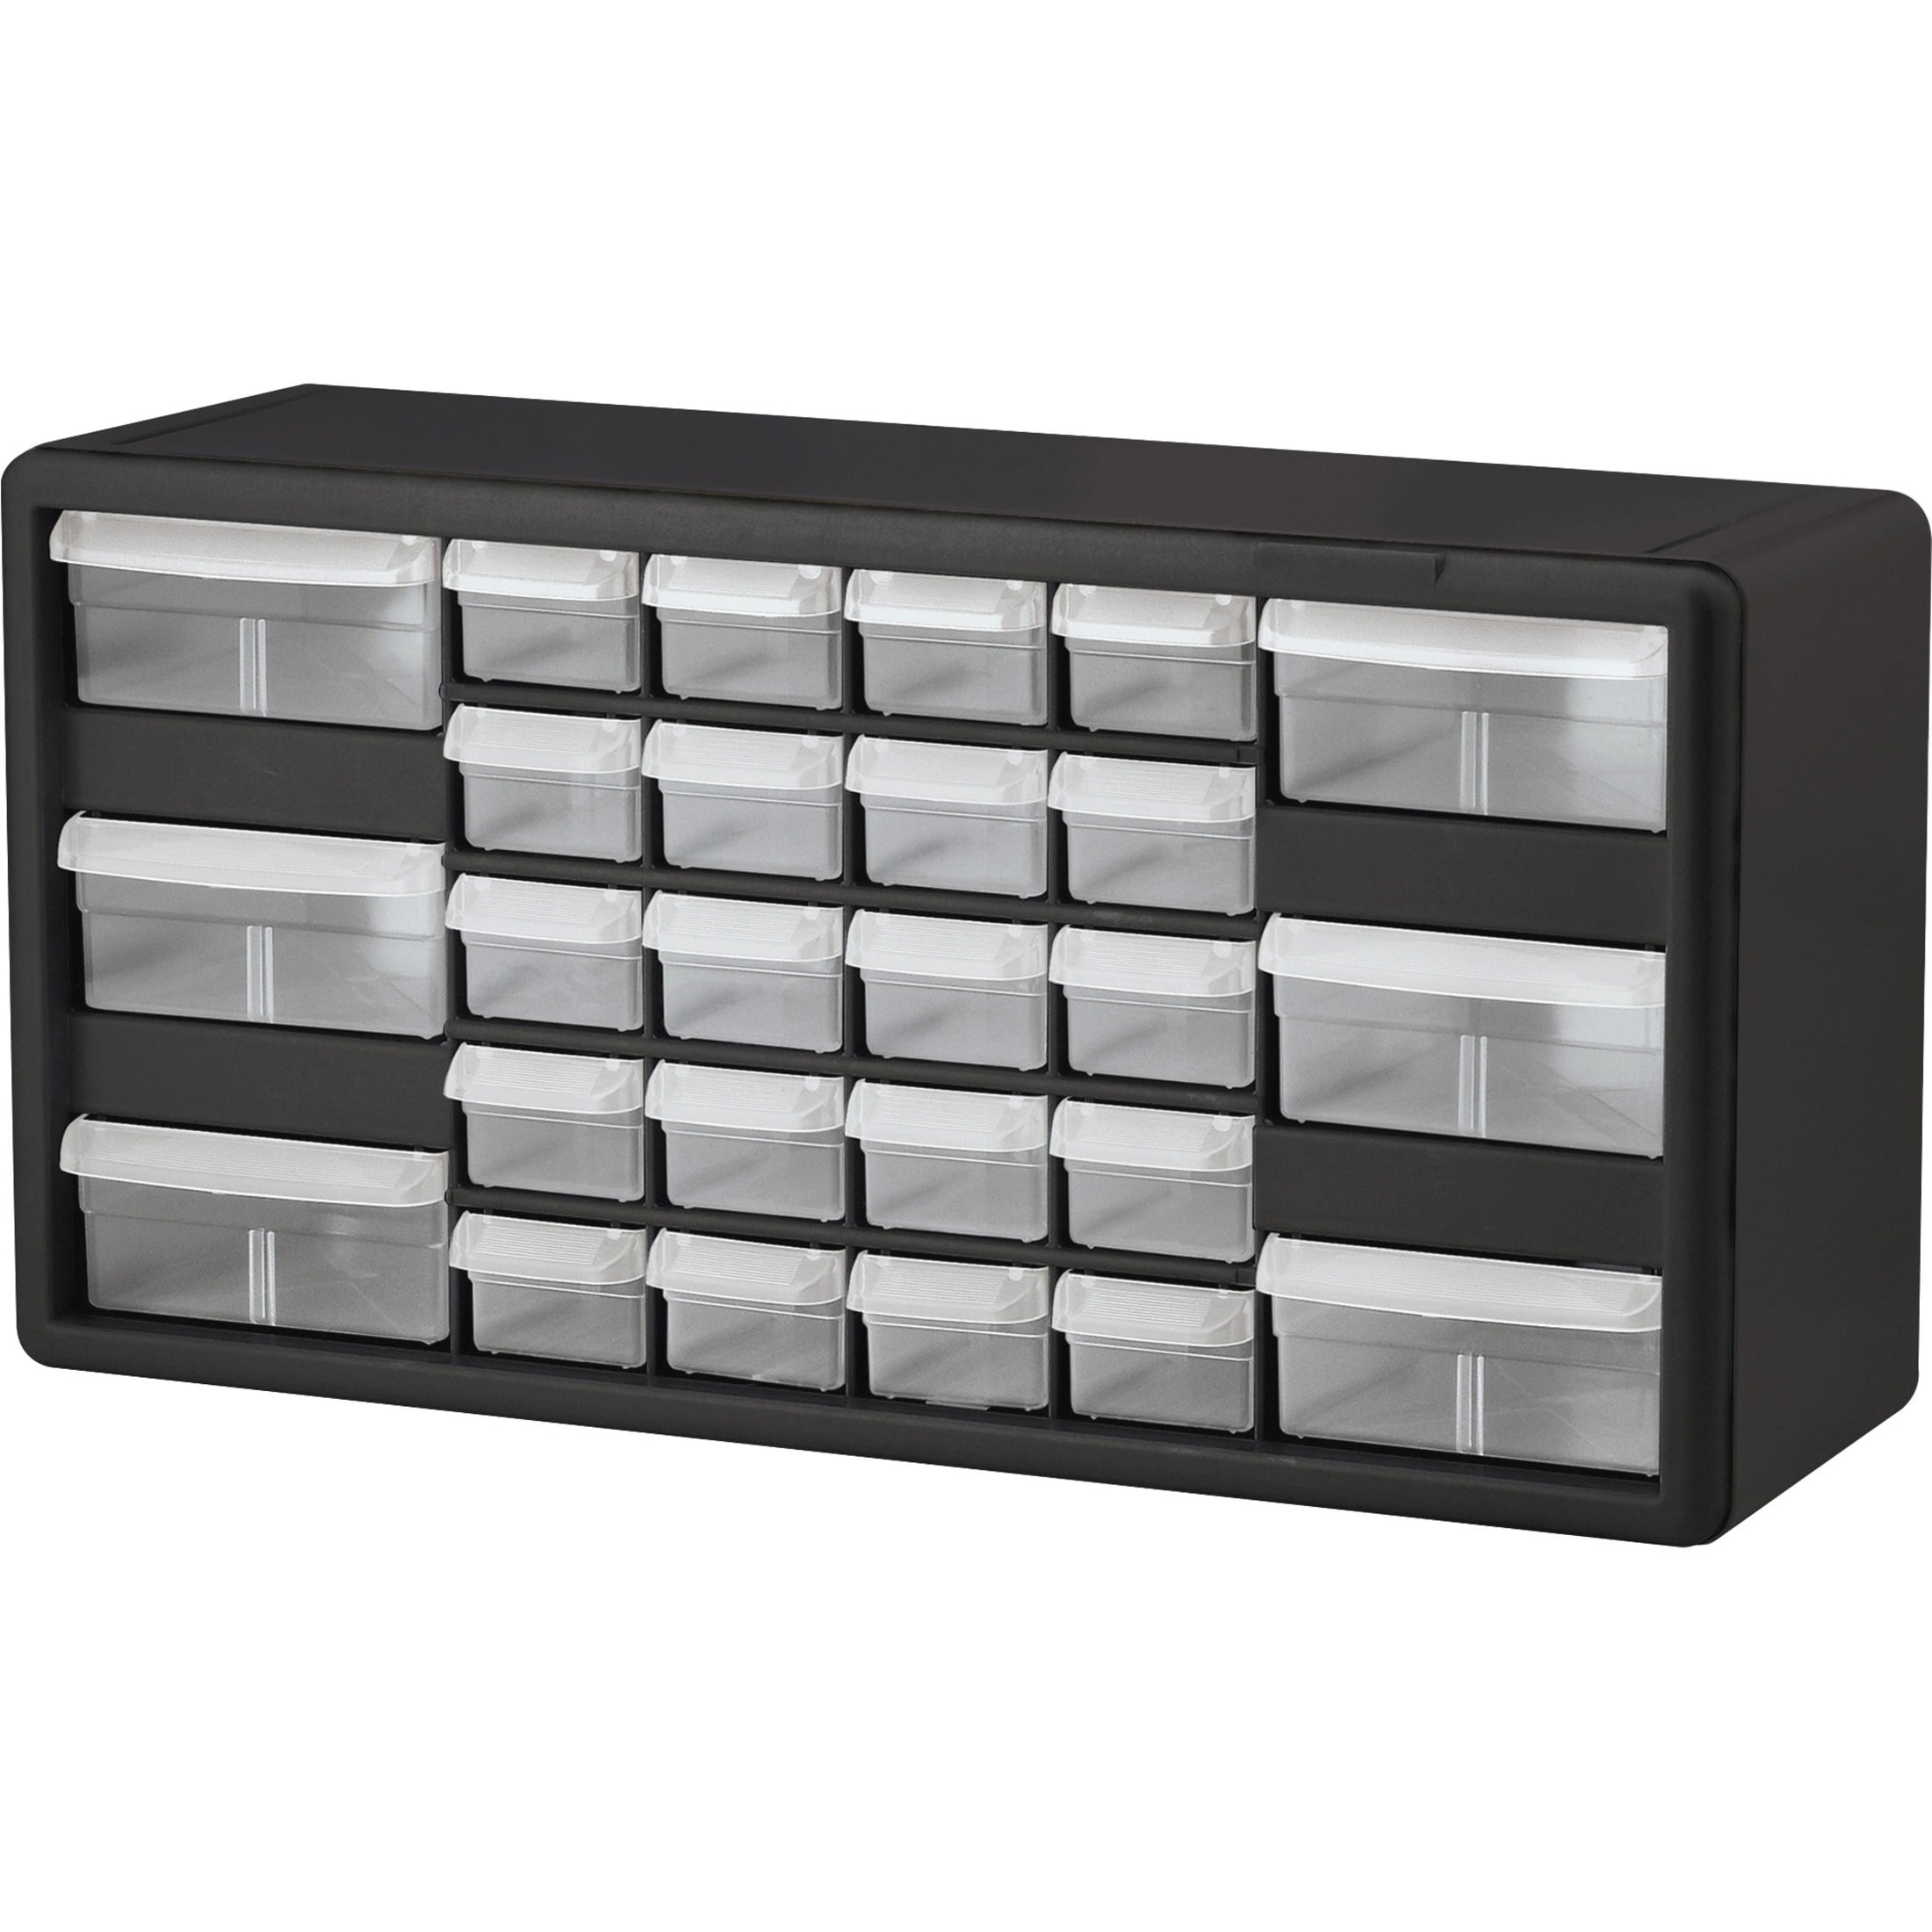 39 Drawers 2x Cabinets Stack-On DS-39 Storage Cabinet 